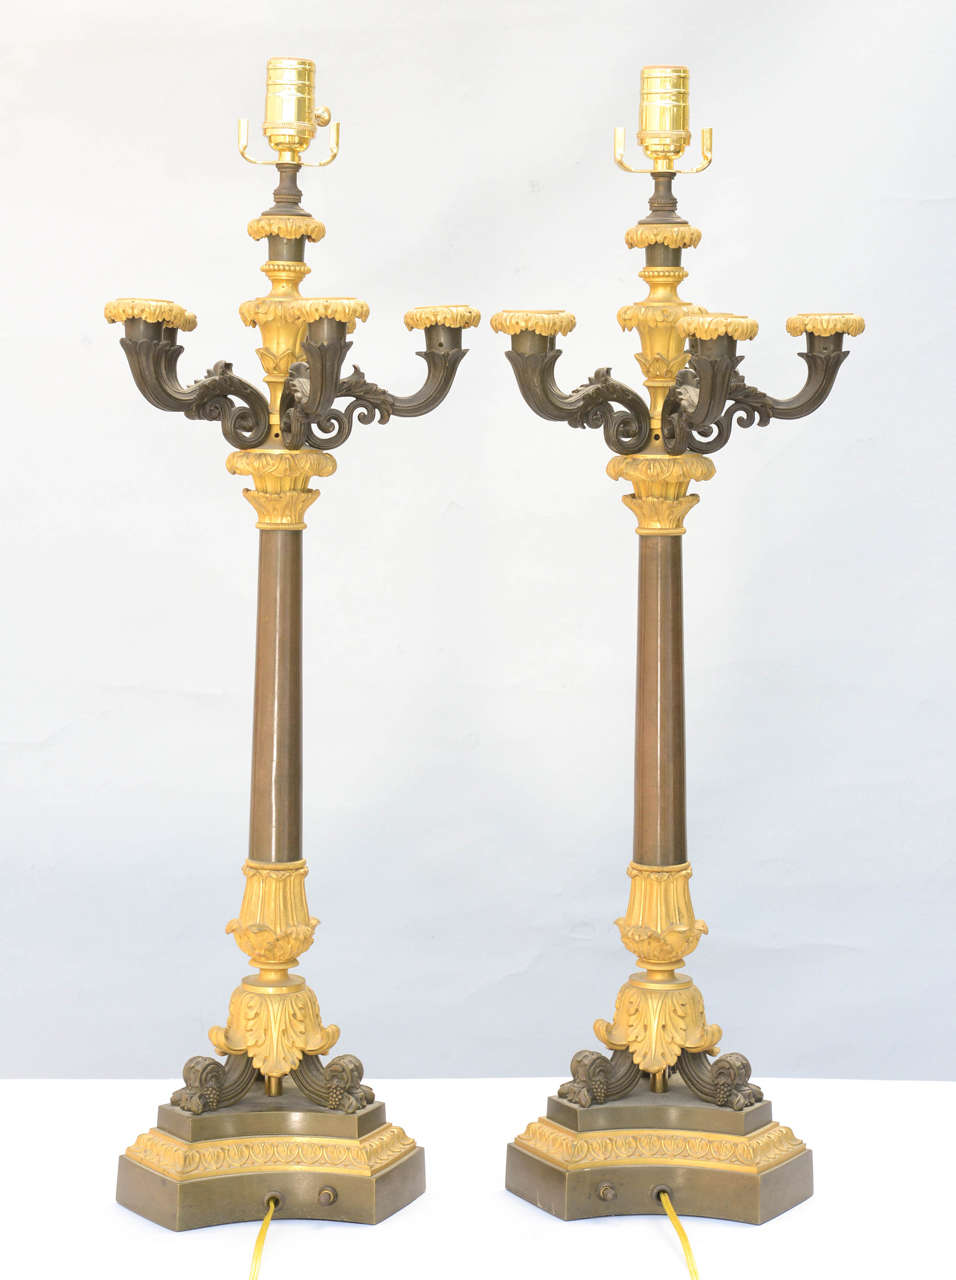 Pair of candlesticks, of patinated and dore bronze, each having five scrolling candlearms, raised on tripartite base; lamped.

Stock ID: D9163